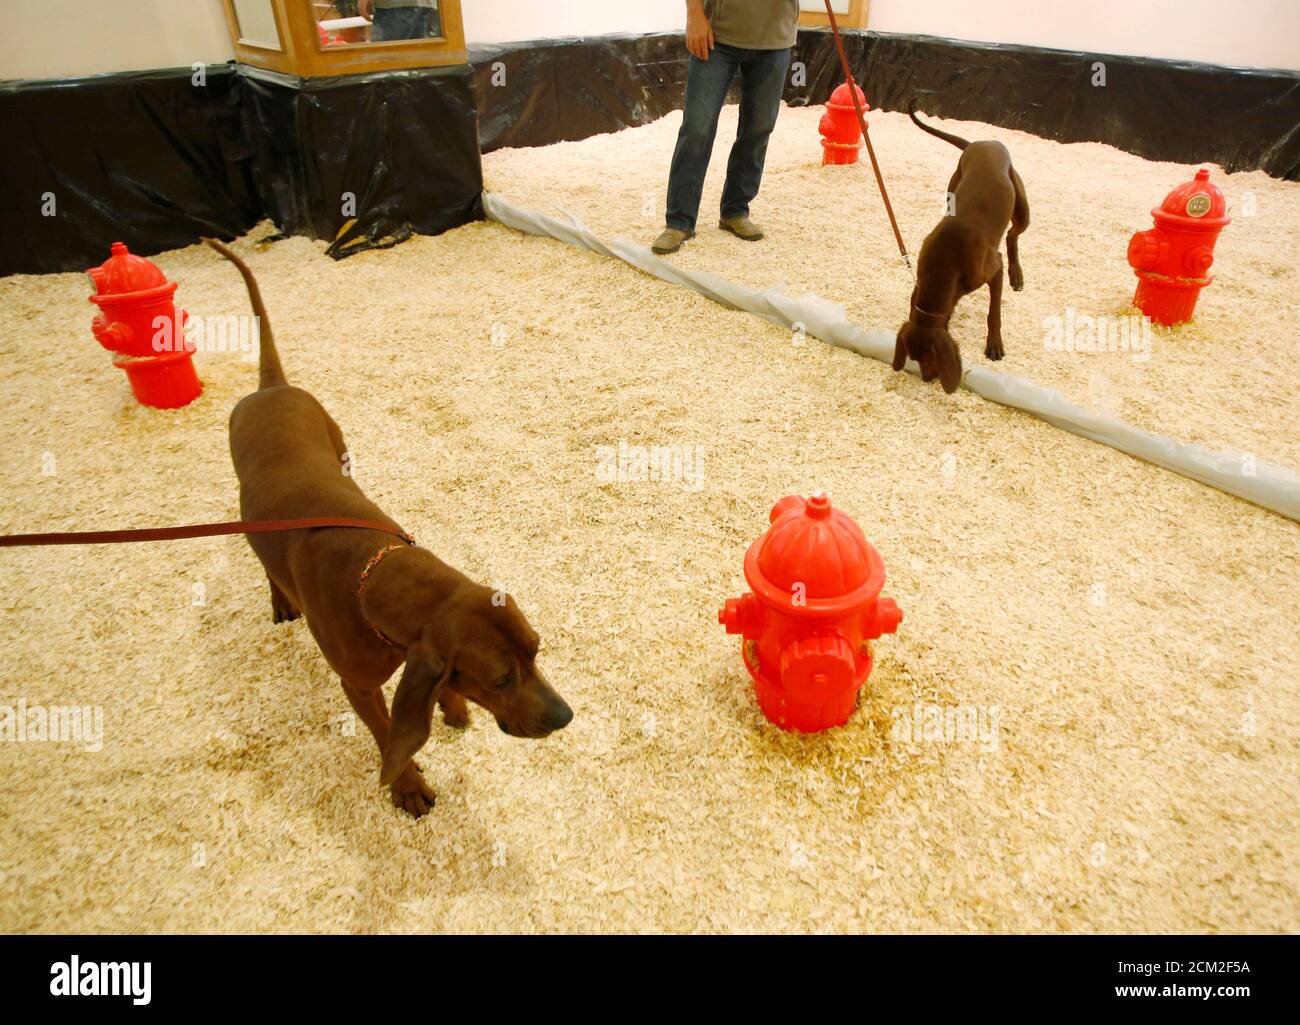 Dogs use the indoor bathroom at the dog spa in the basement of the Hotel Pennsylvania in advance of the Westminster Dog Show in New York, February 10, 2013.   REUTERS/Carlo Allegri  (UNITED STATES - Tags: SOCIETY ANIMALS) Stock Photo